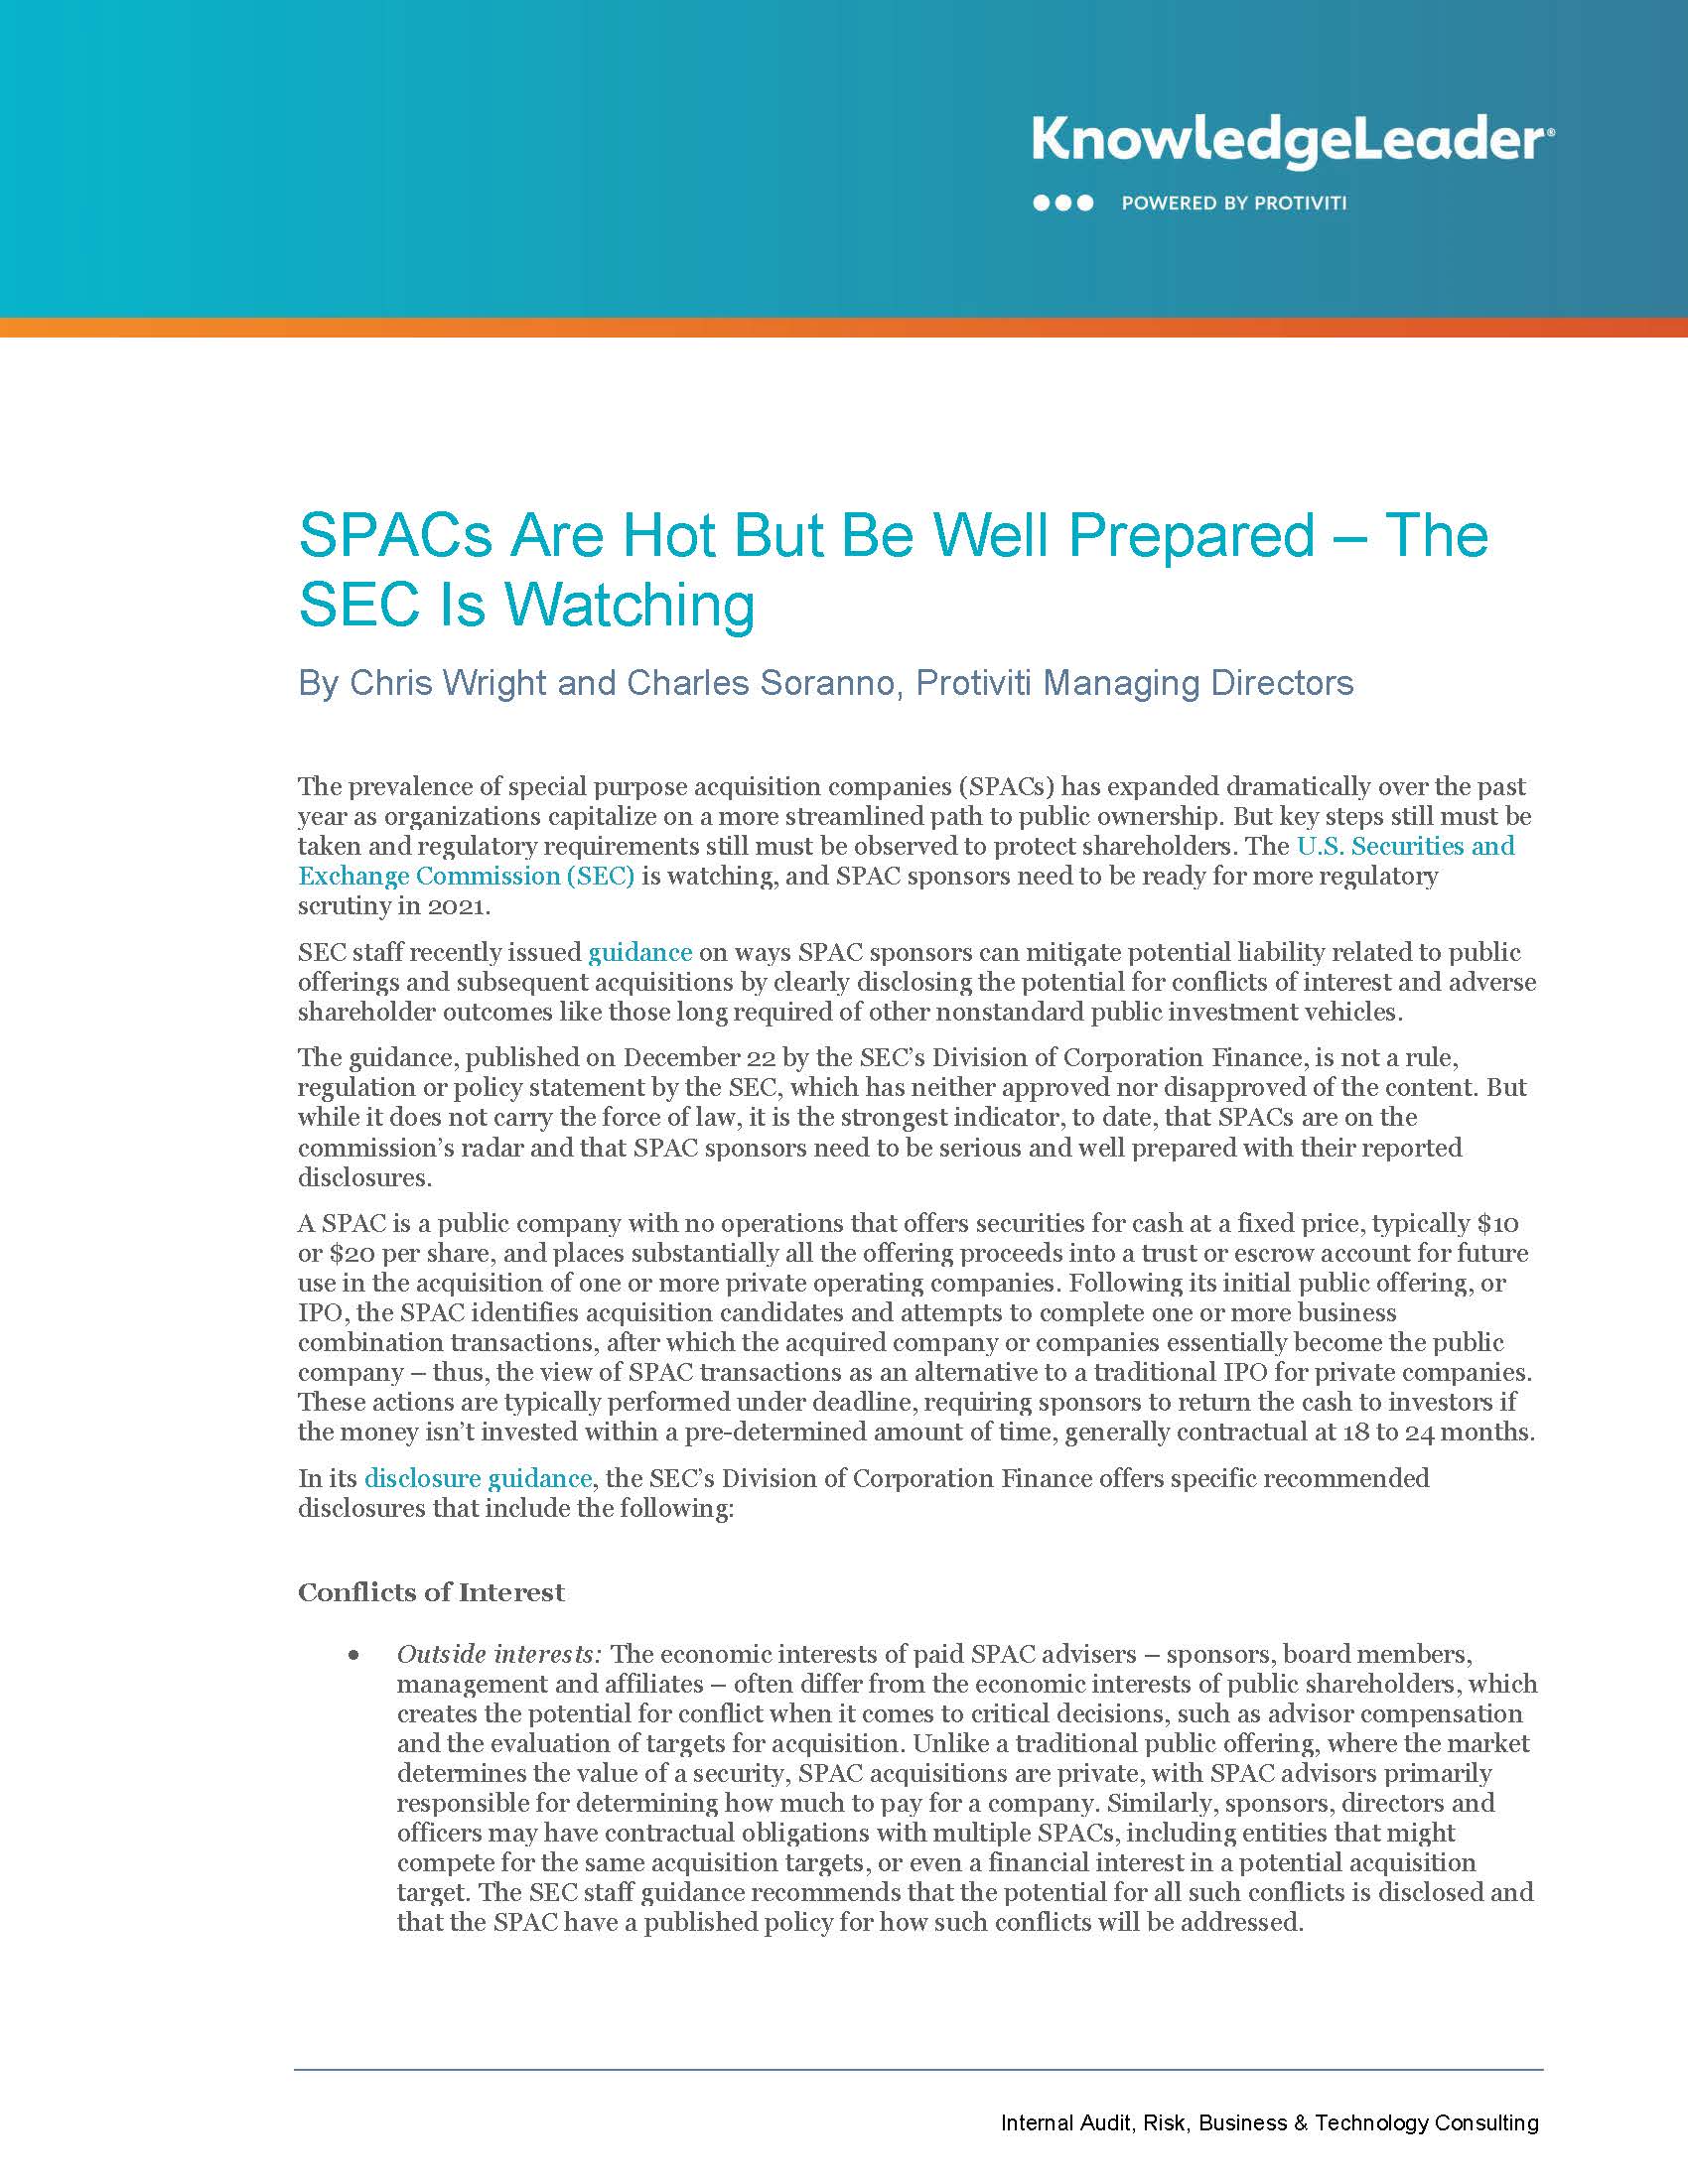 Screenshot of the first page of SPACs Are Hot But Be Well Prepared – The SEC Is Watching